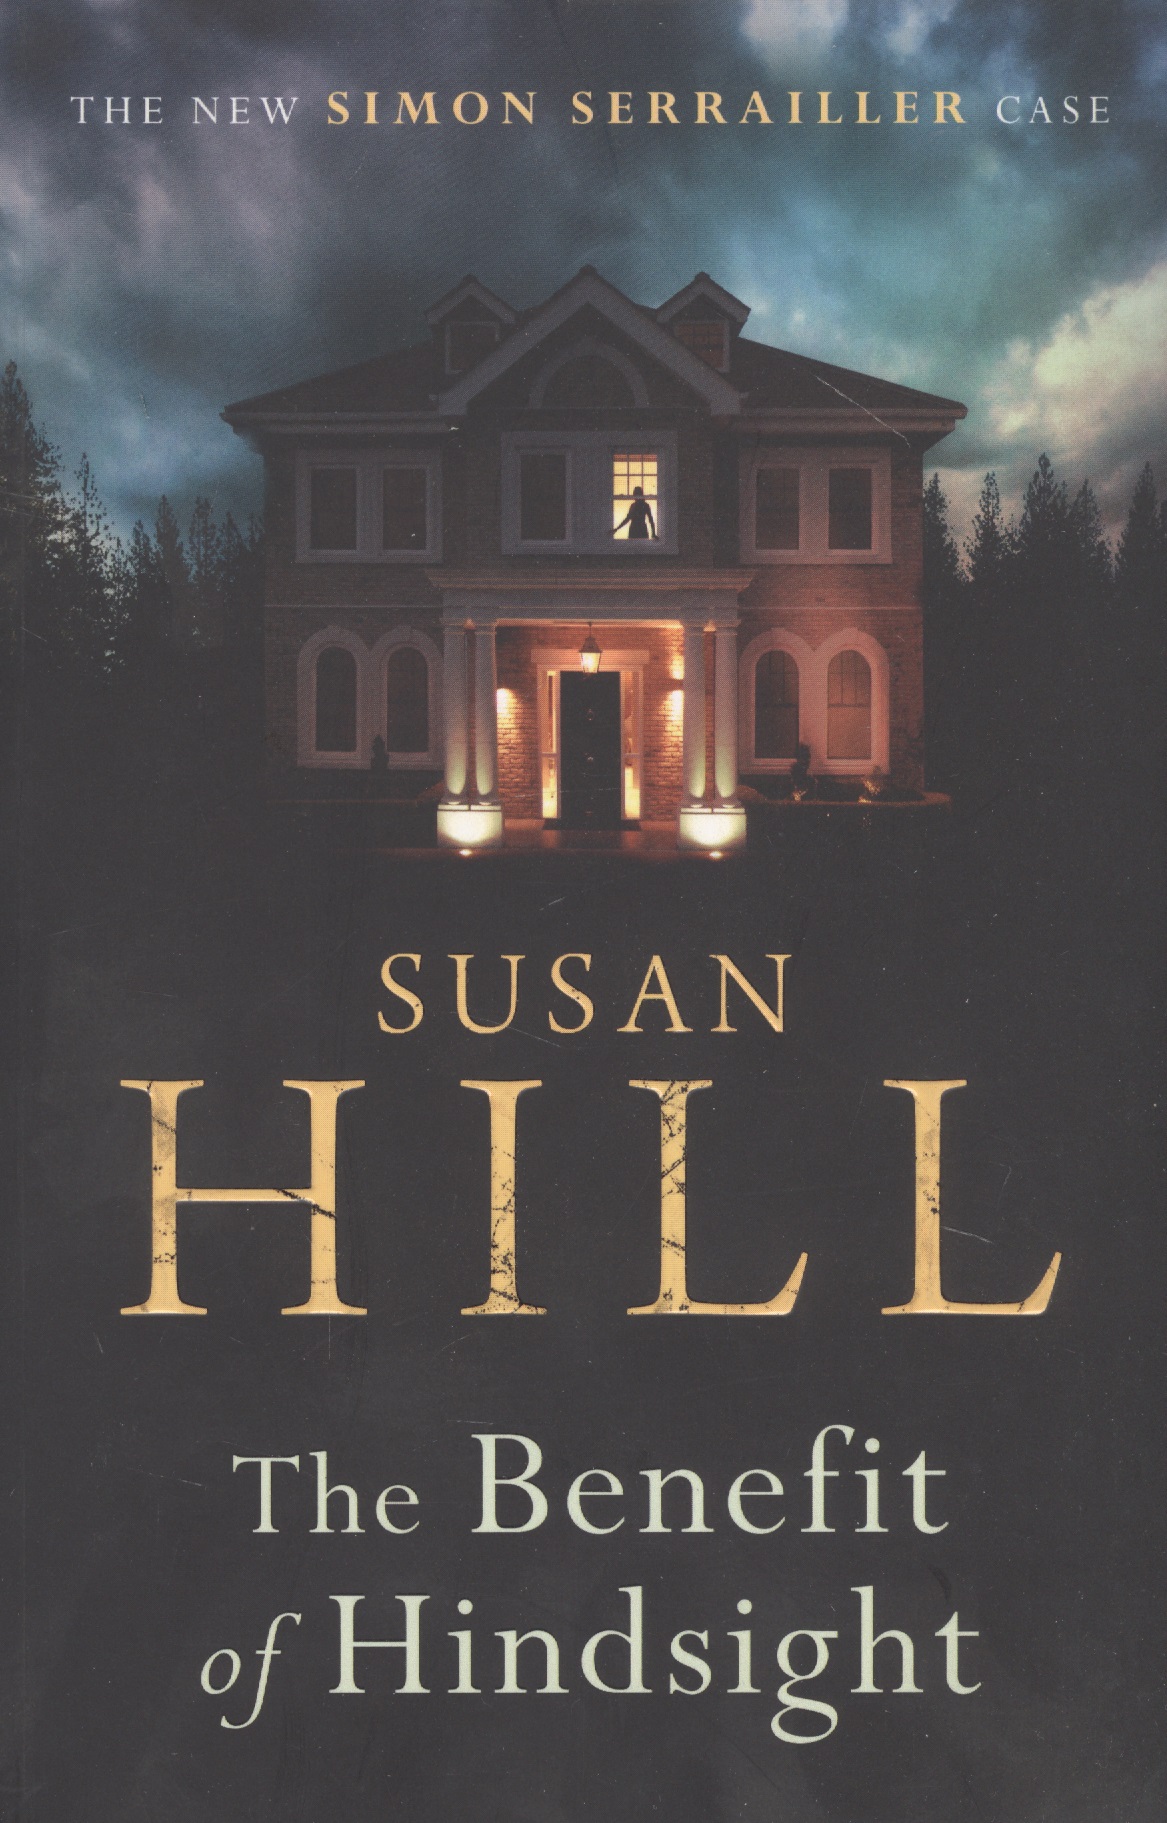 hill susan the vows of silence a simon serrailler case Hill Susan The Benefit of Hindsight